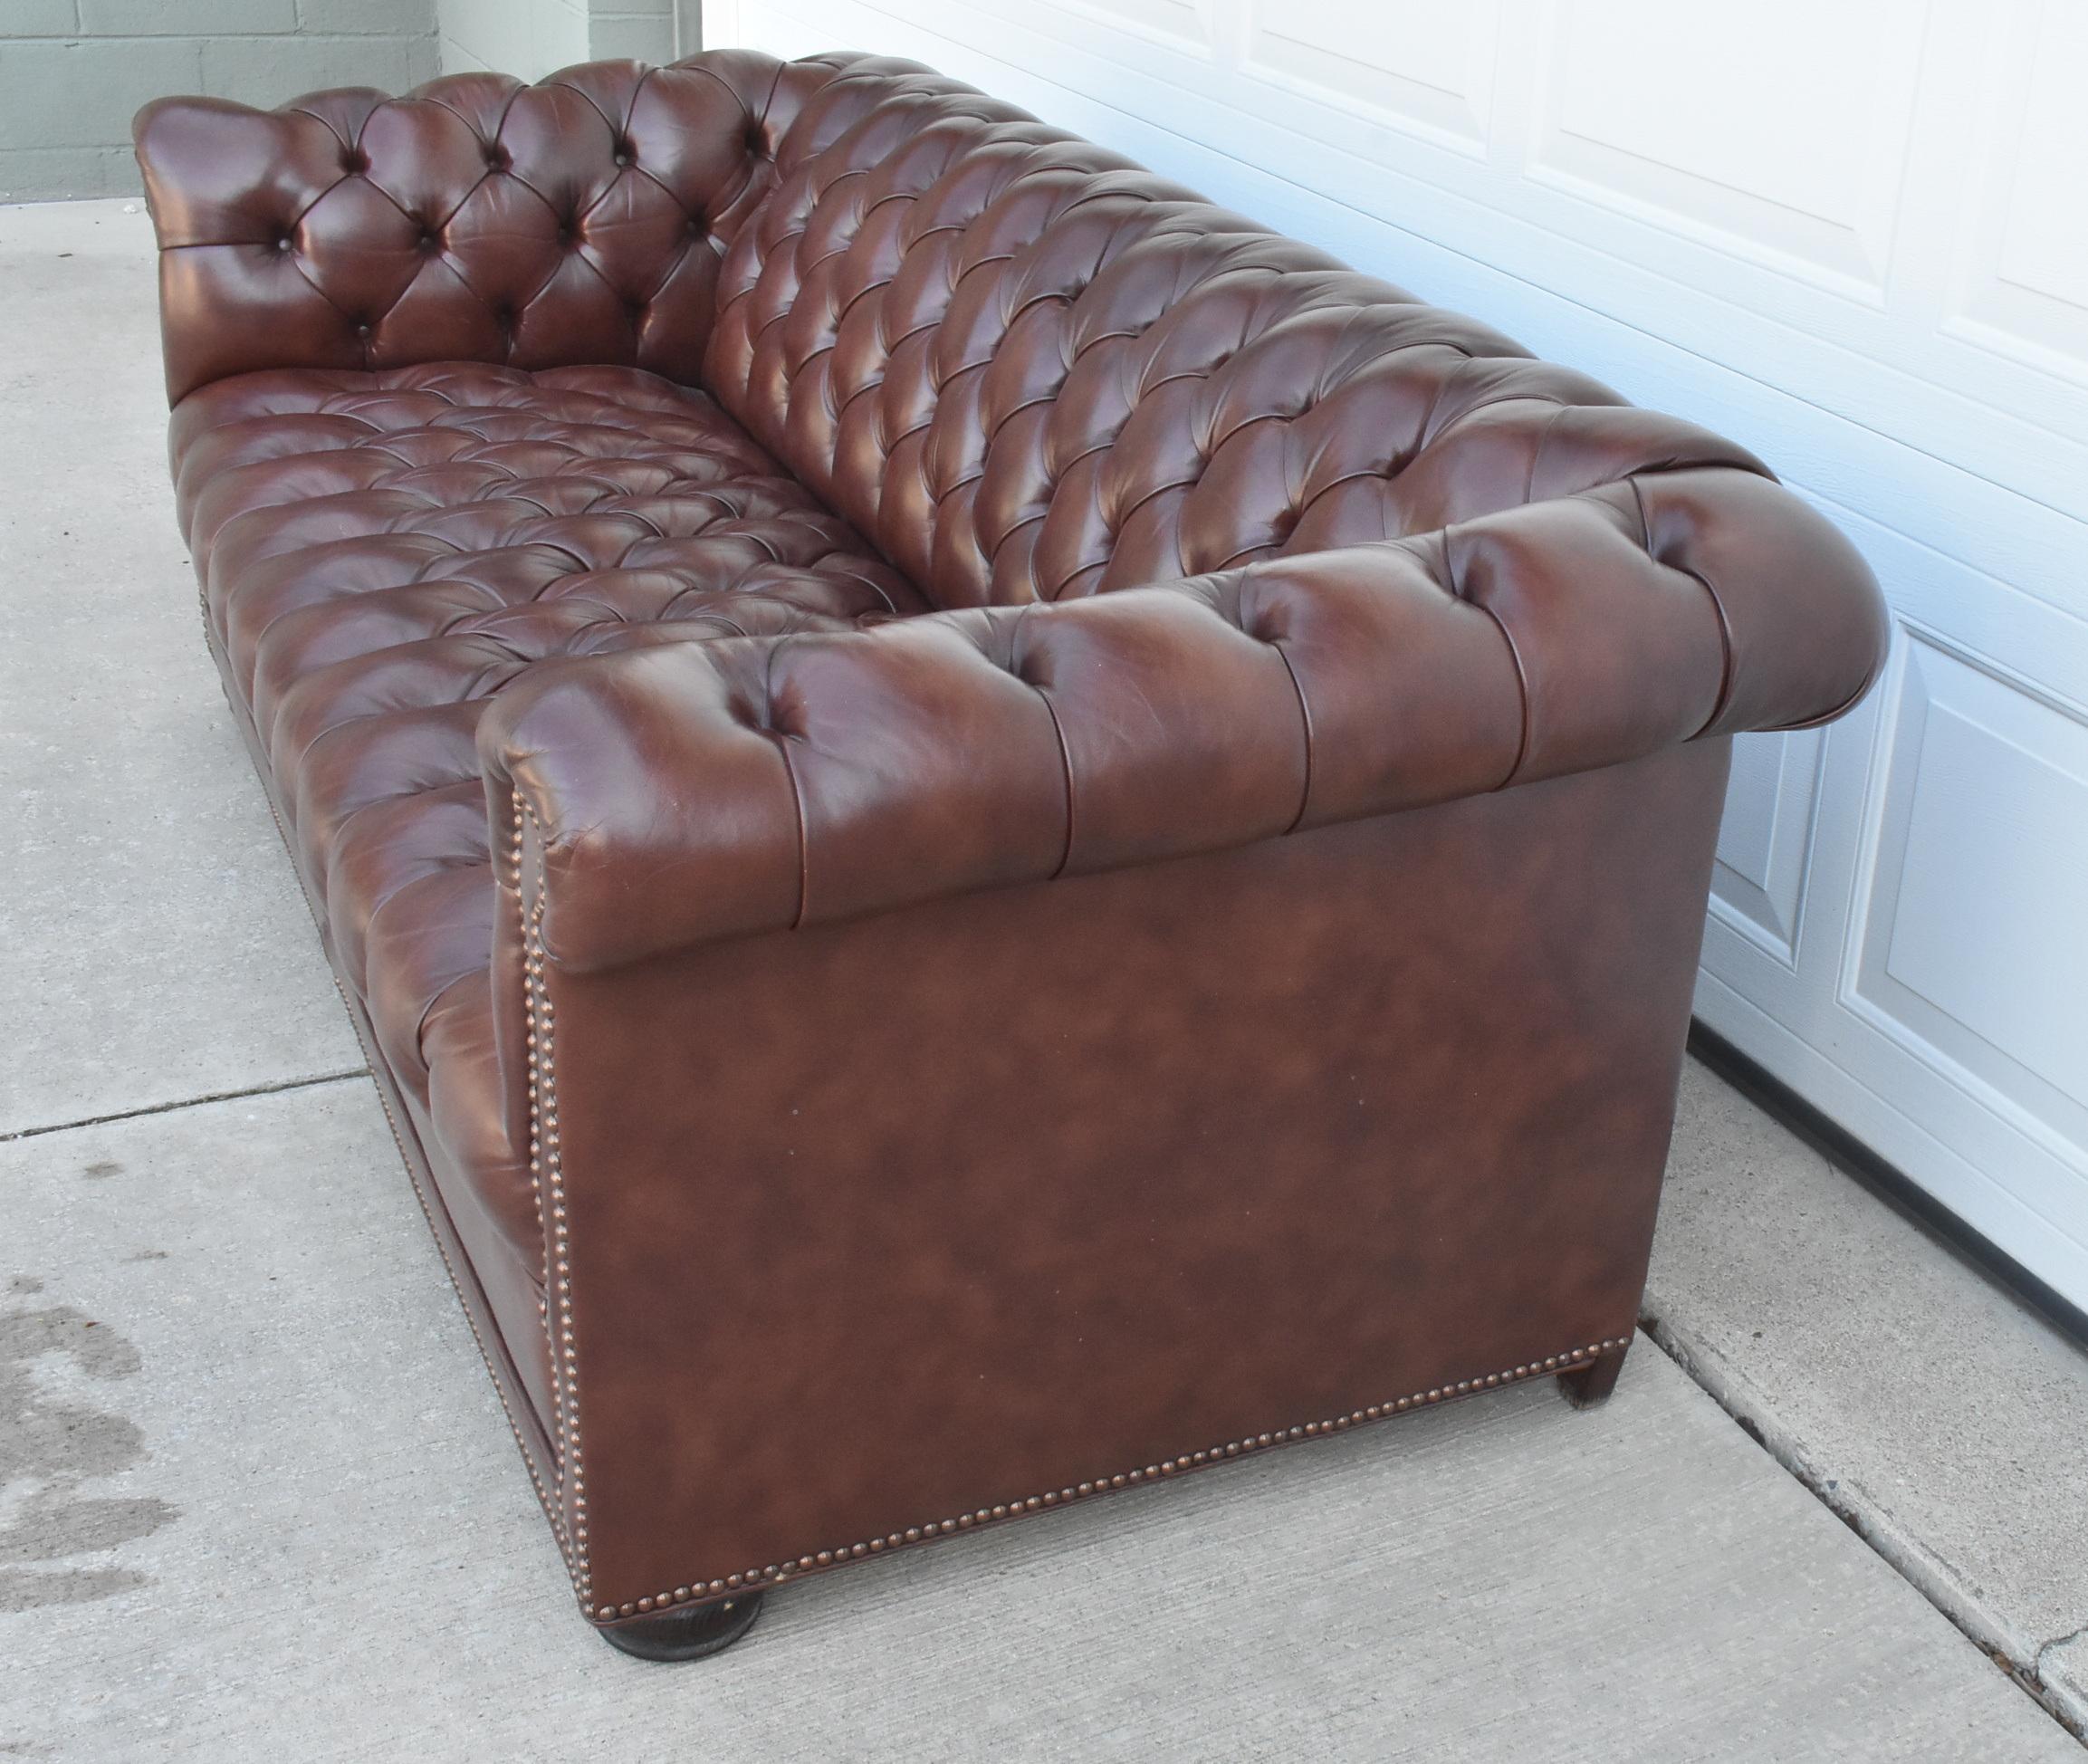 Gorgeous chesterfield in rich brown leather by Classic Leather Co circa 1980's. This sofa features thick brown leather, brass nail head trim, and heavy solid construction. 76